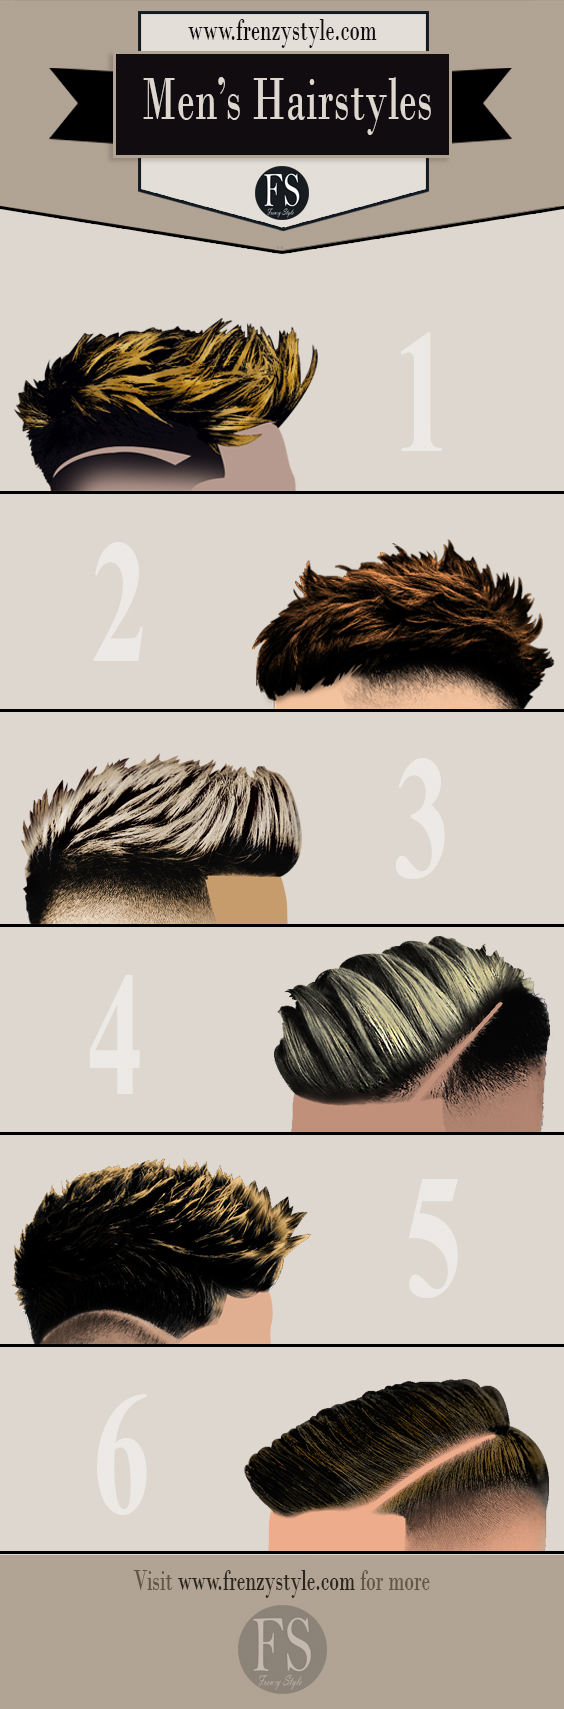 men Hairstyles Archives - FrenzyStyle